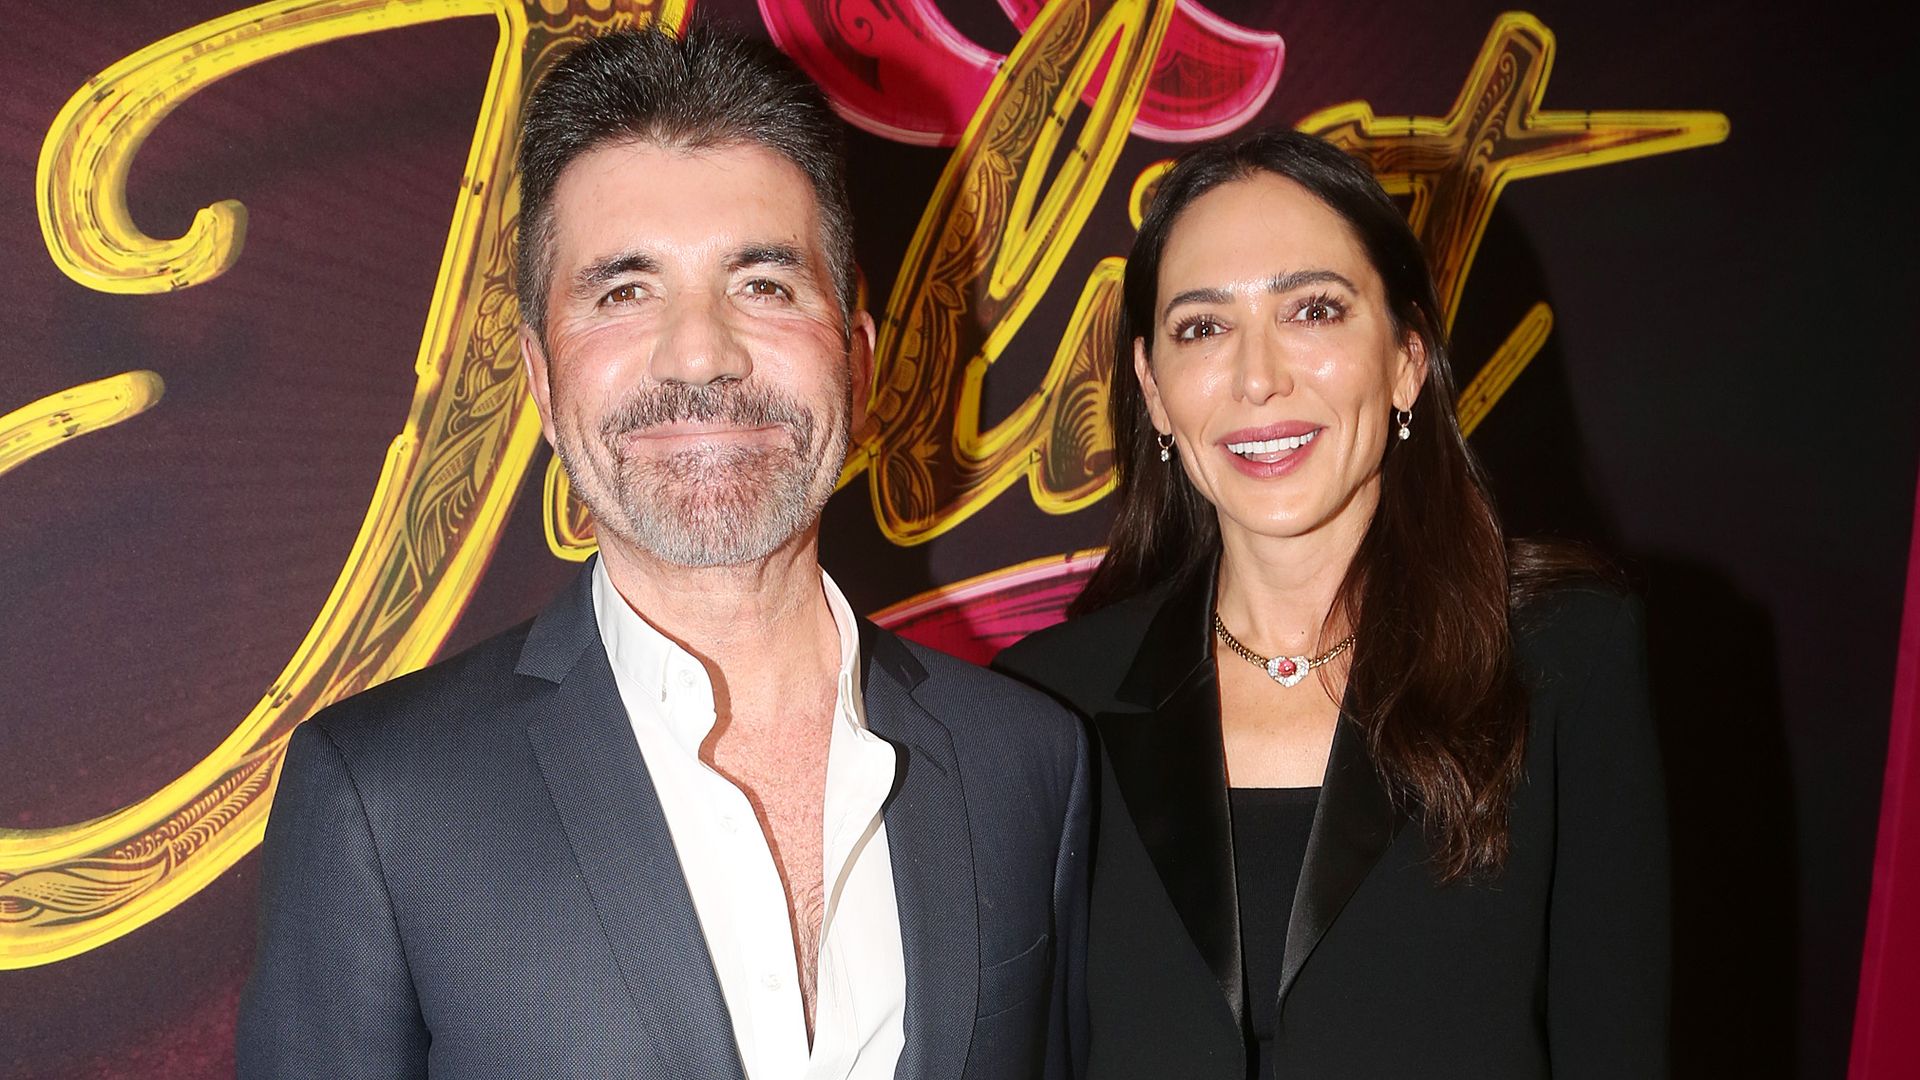 Simon Cowell and Lauren Silverman at the opening night of "& Juliet" in 2022 